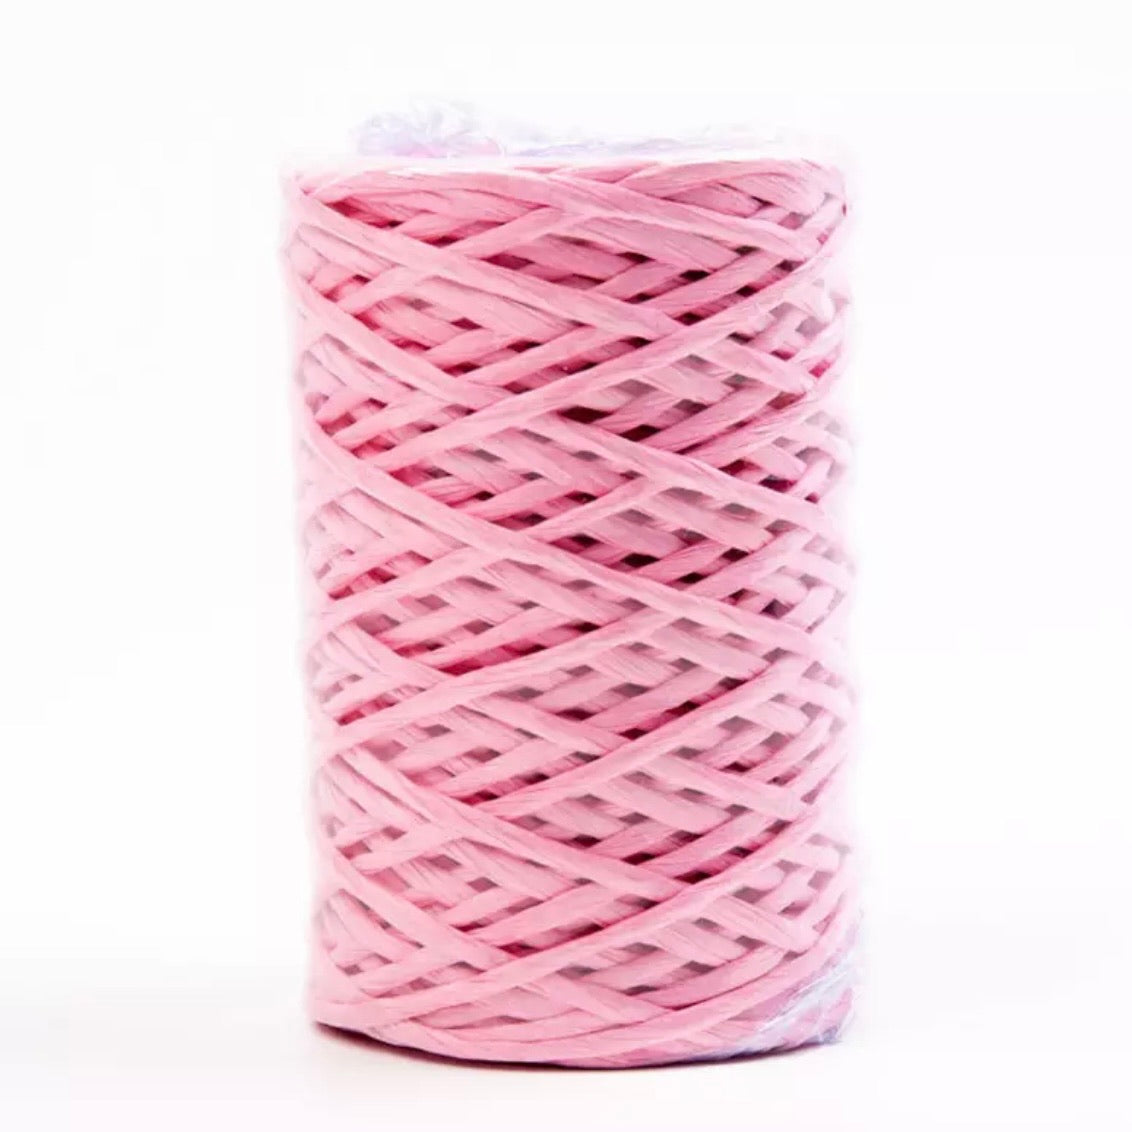 Iron Wire Paper Rattan 1mm Cord Roll 40 mtrs - Pink